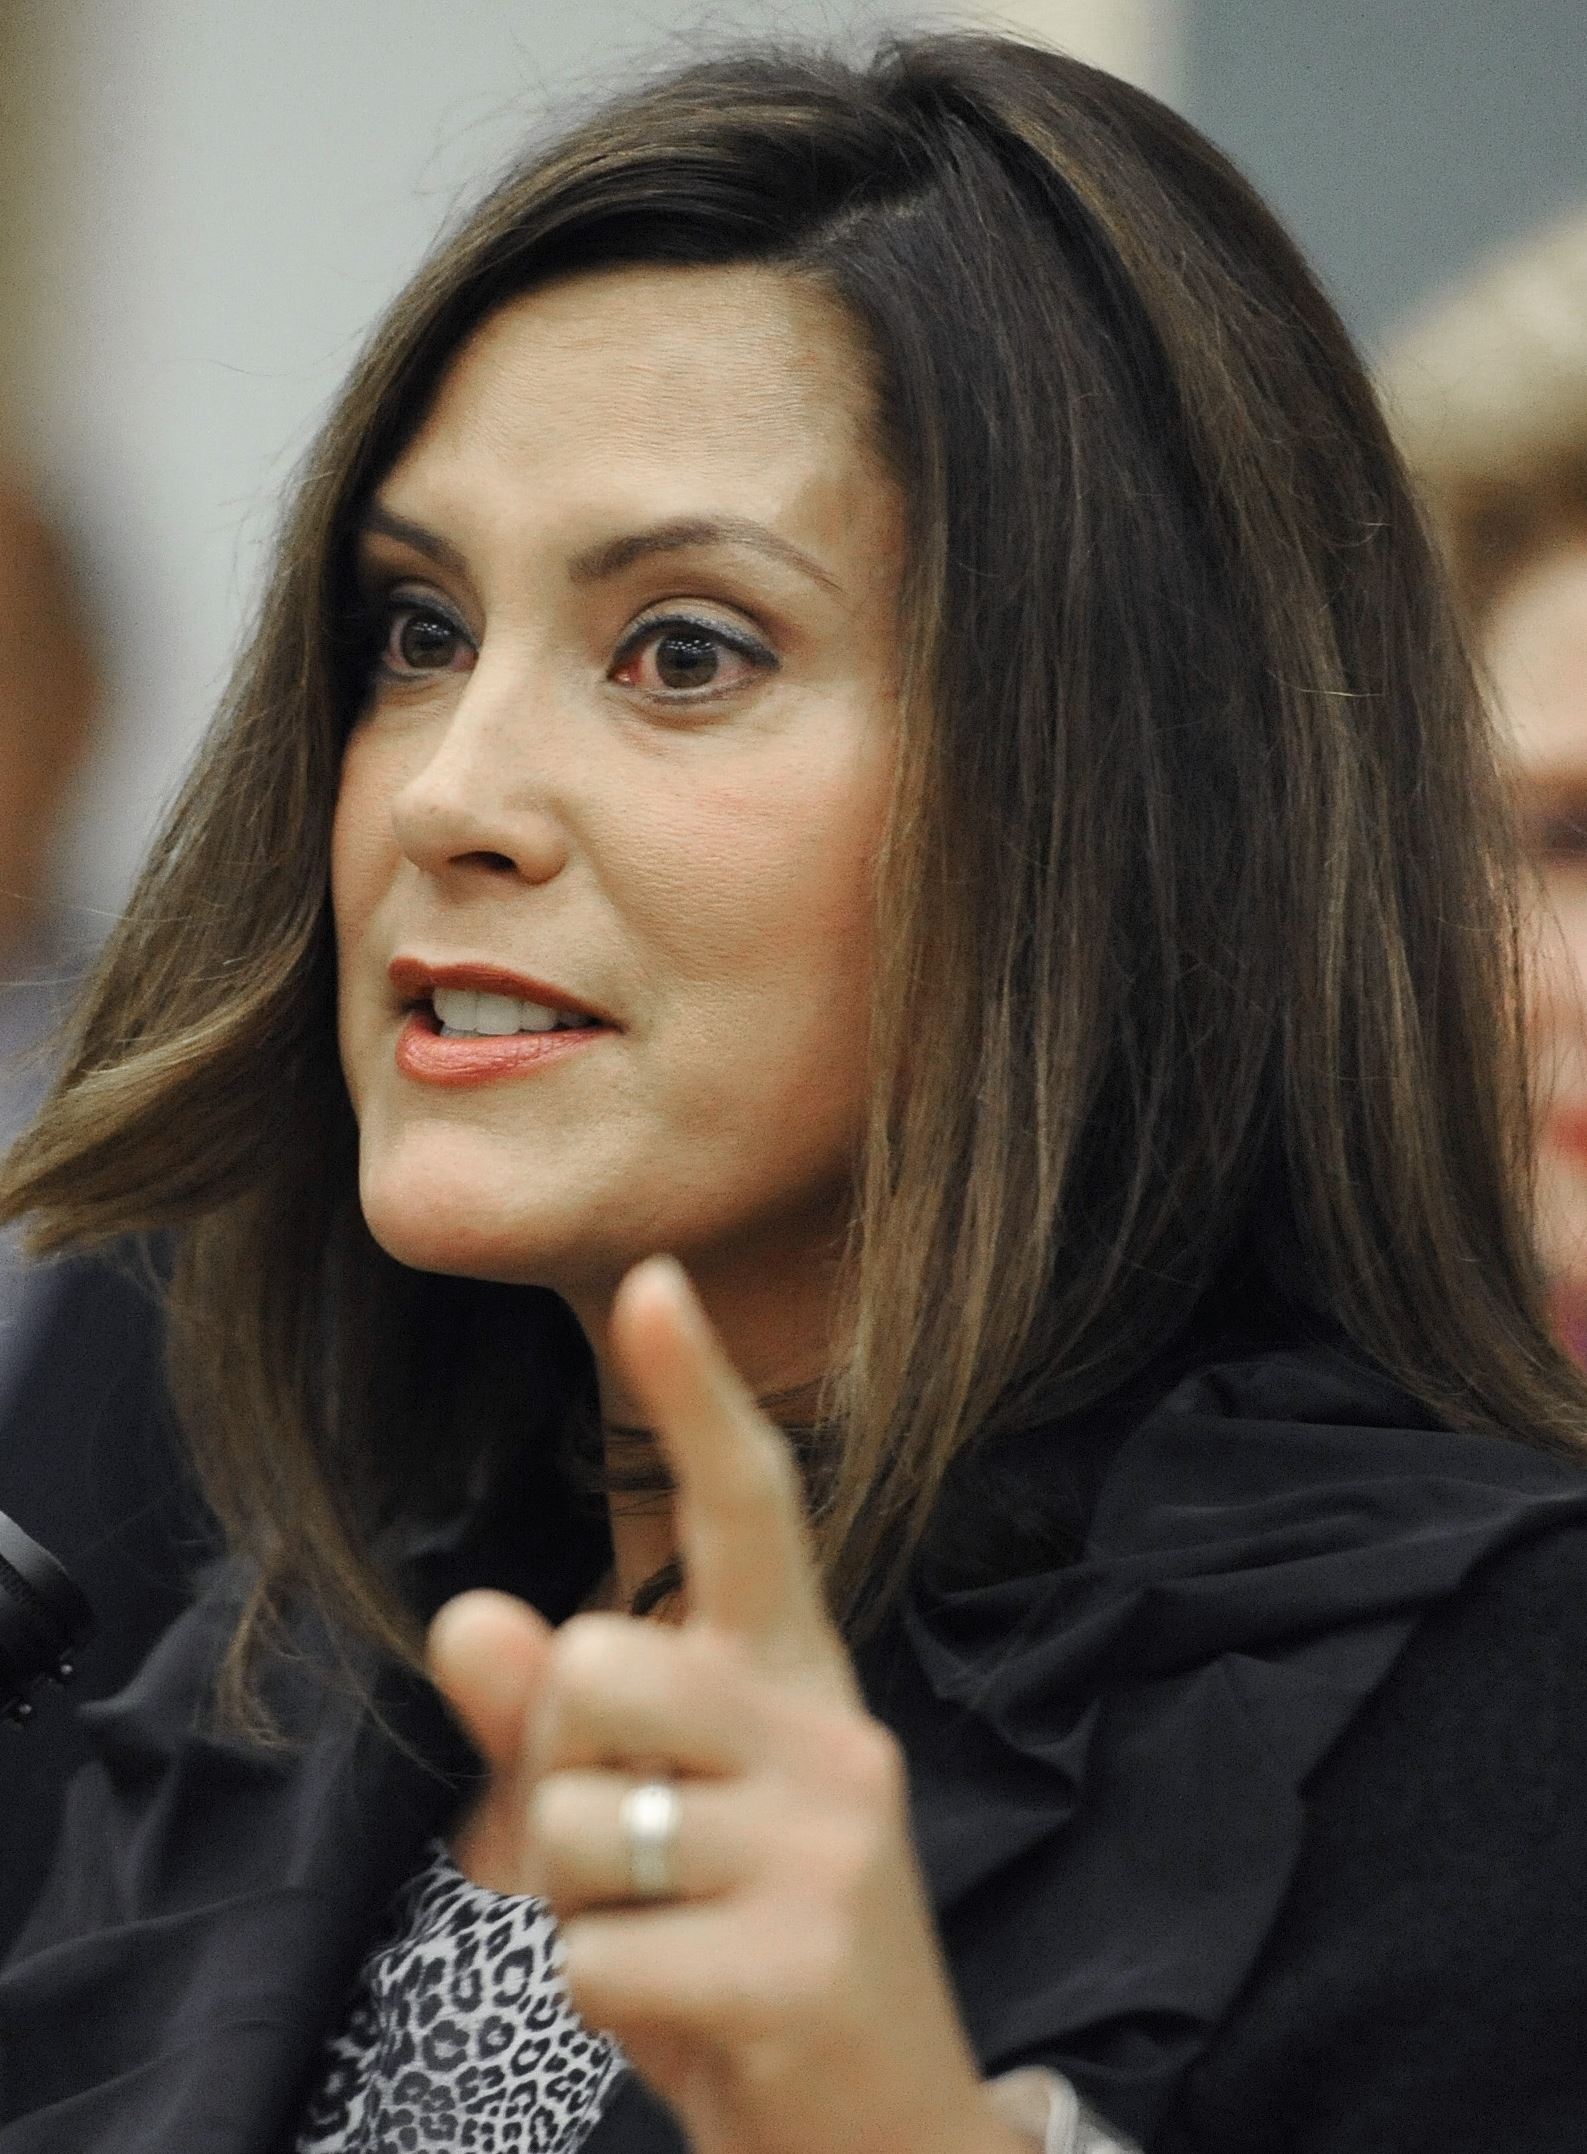 Whitmer files to run for Michigan governor in 2018 - The Blade